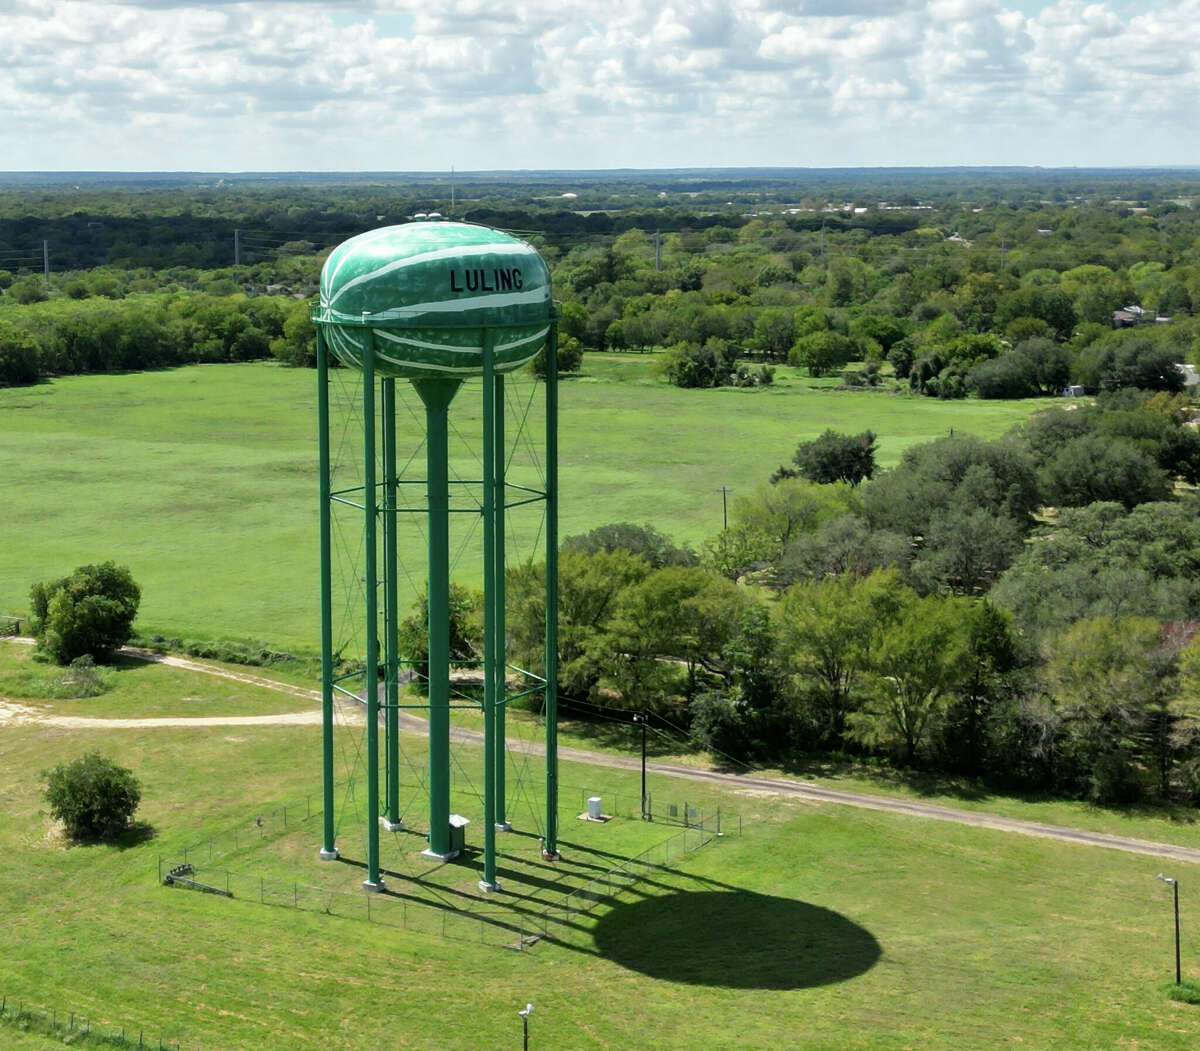 The watermelon water tower that can be seen in Luling, Texas.